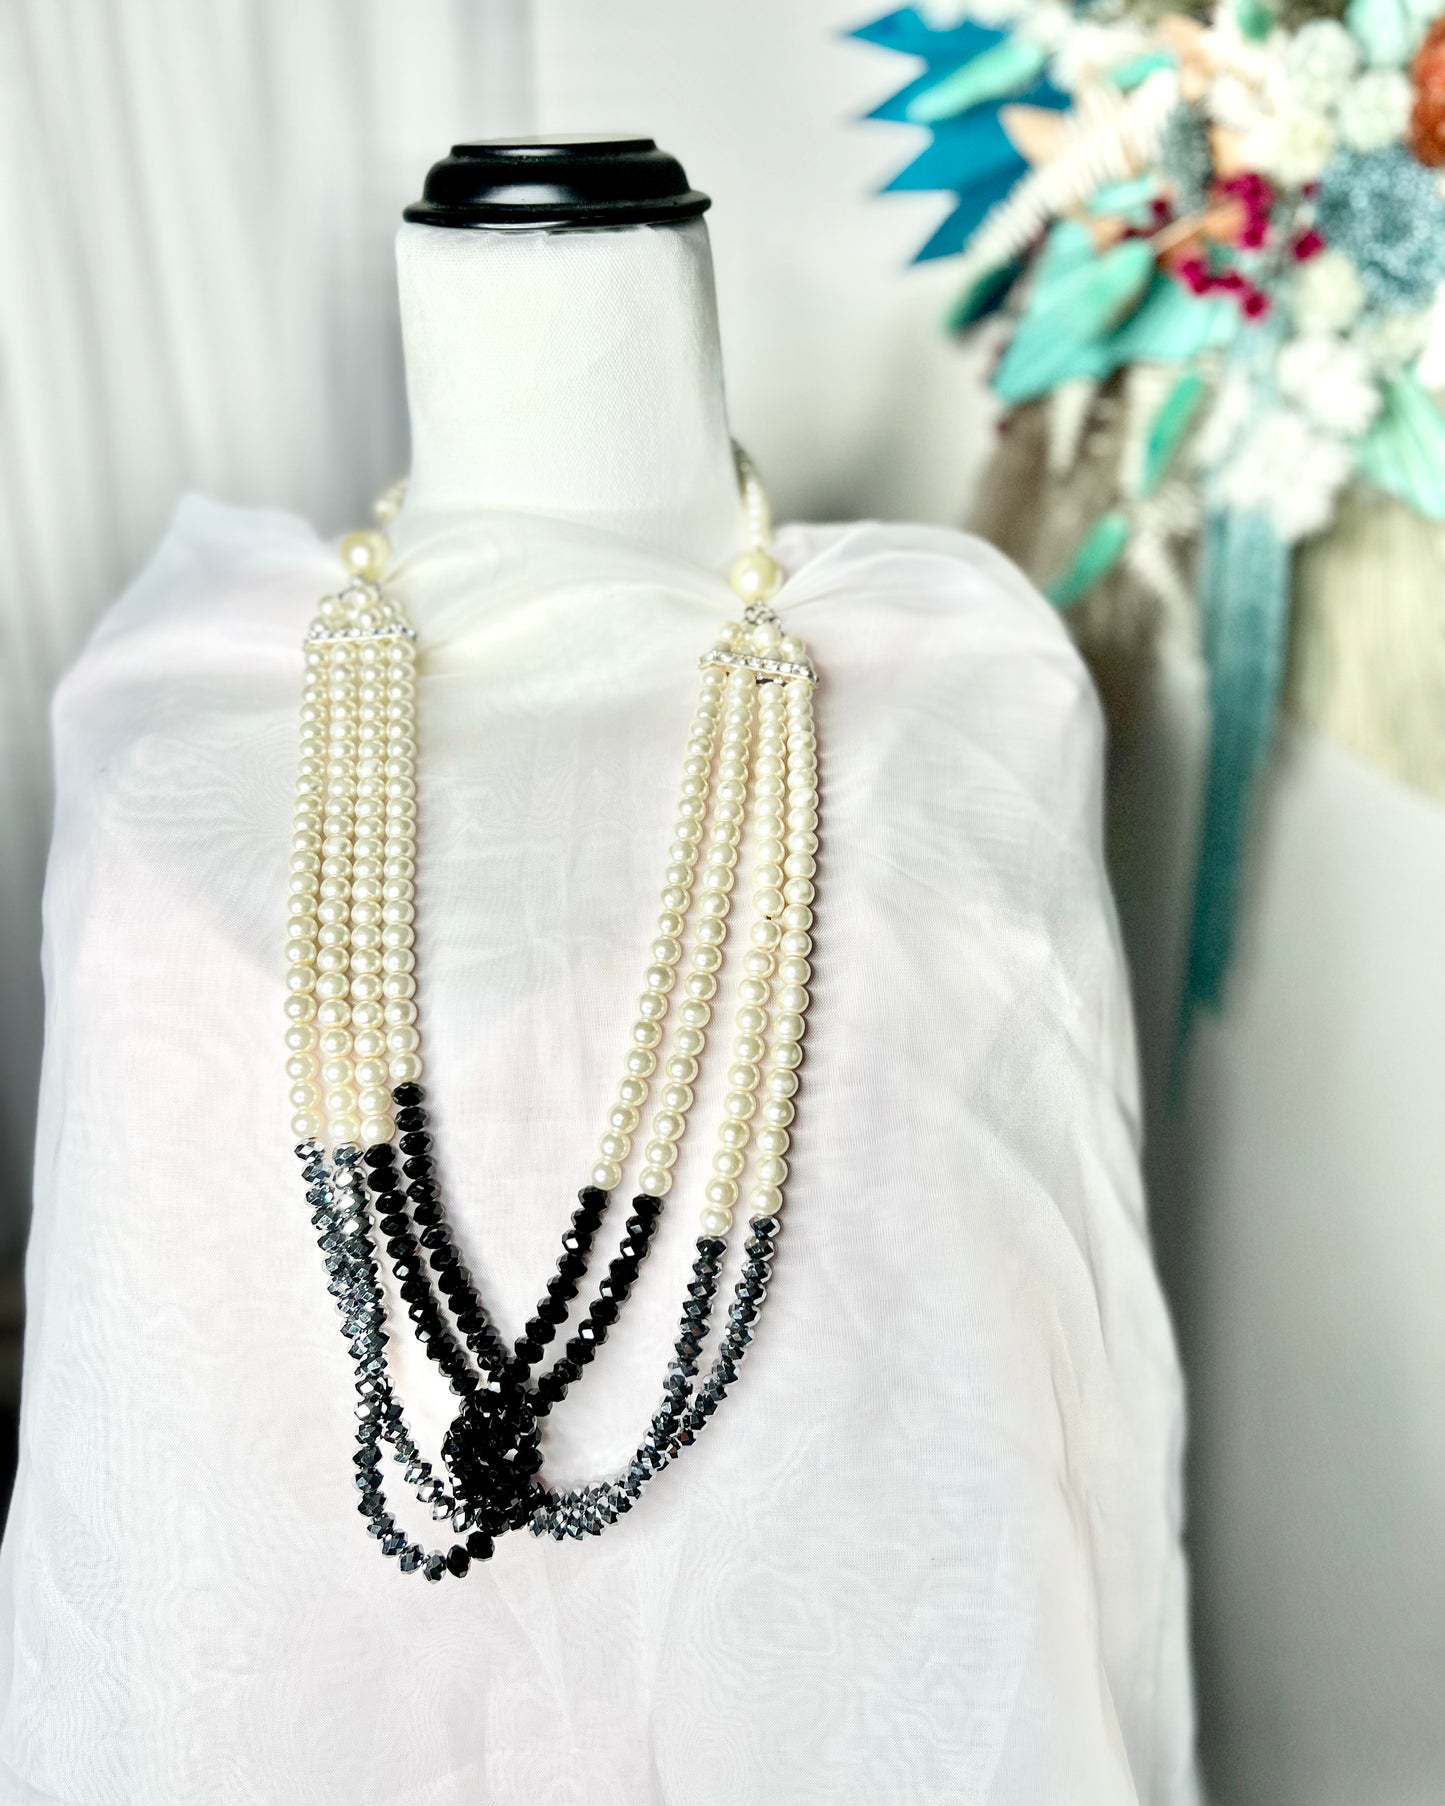 Gatsby Necklace - Multitone Twist: Our beaded necklaces are the perfect addition to your next Gatsby inspired event. These gorgeous designs can also be incorporated into modern outfit
Length: 84cm
Str - Ciao Bella Dresses 